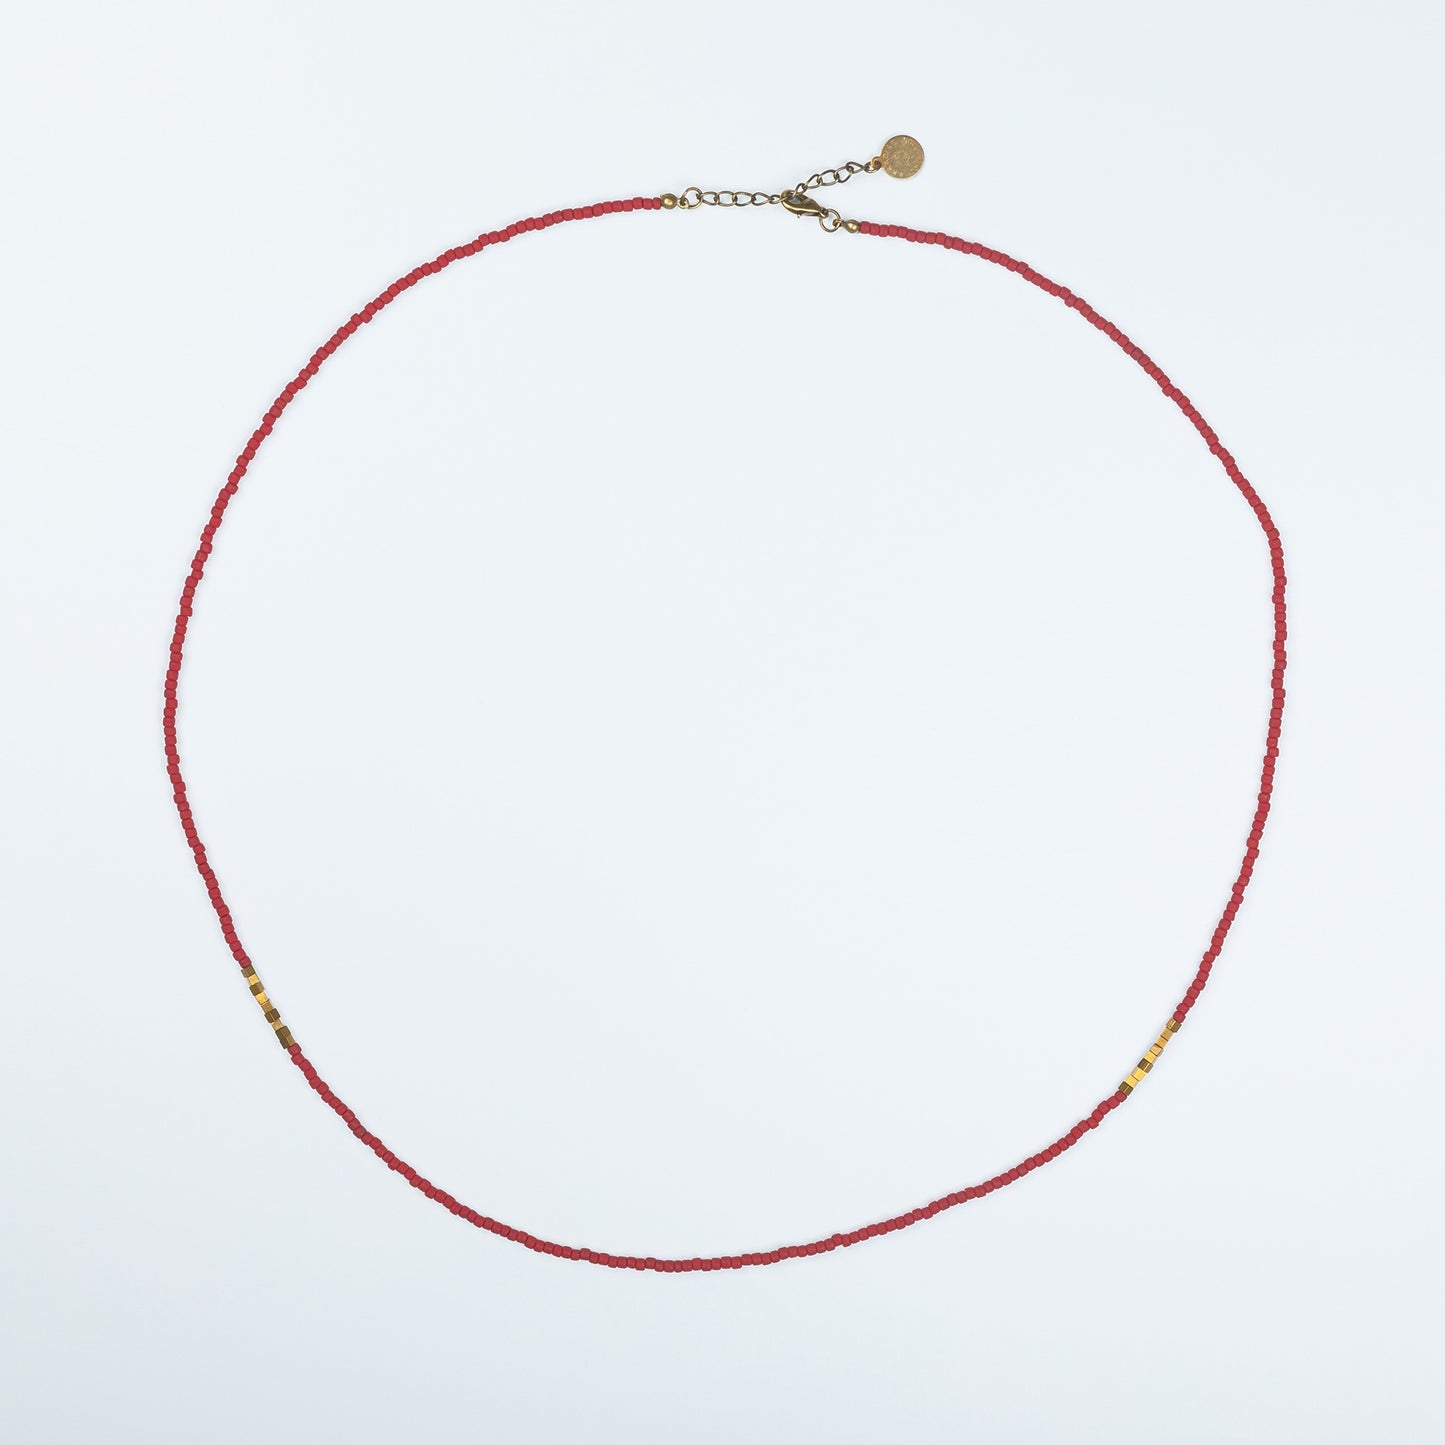 Iraqi Delicate Rope Necklace